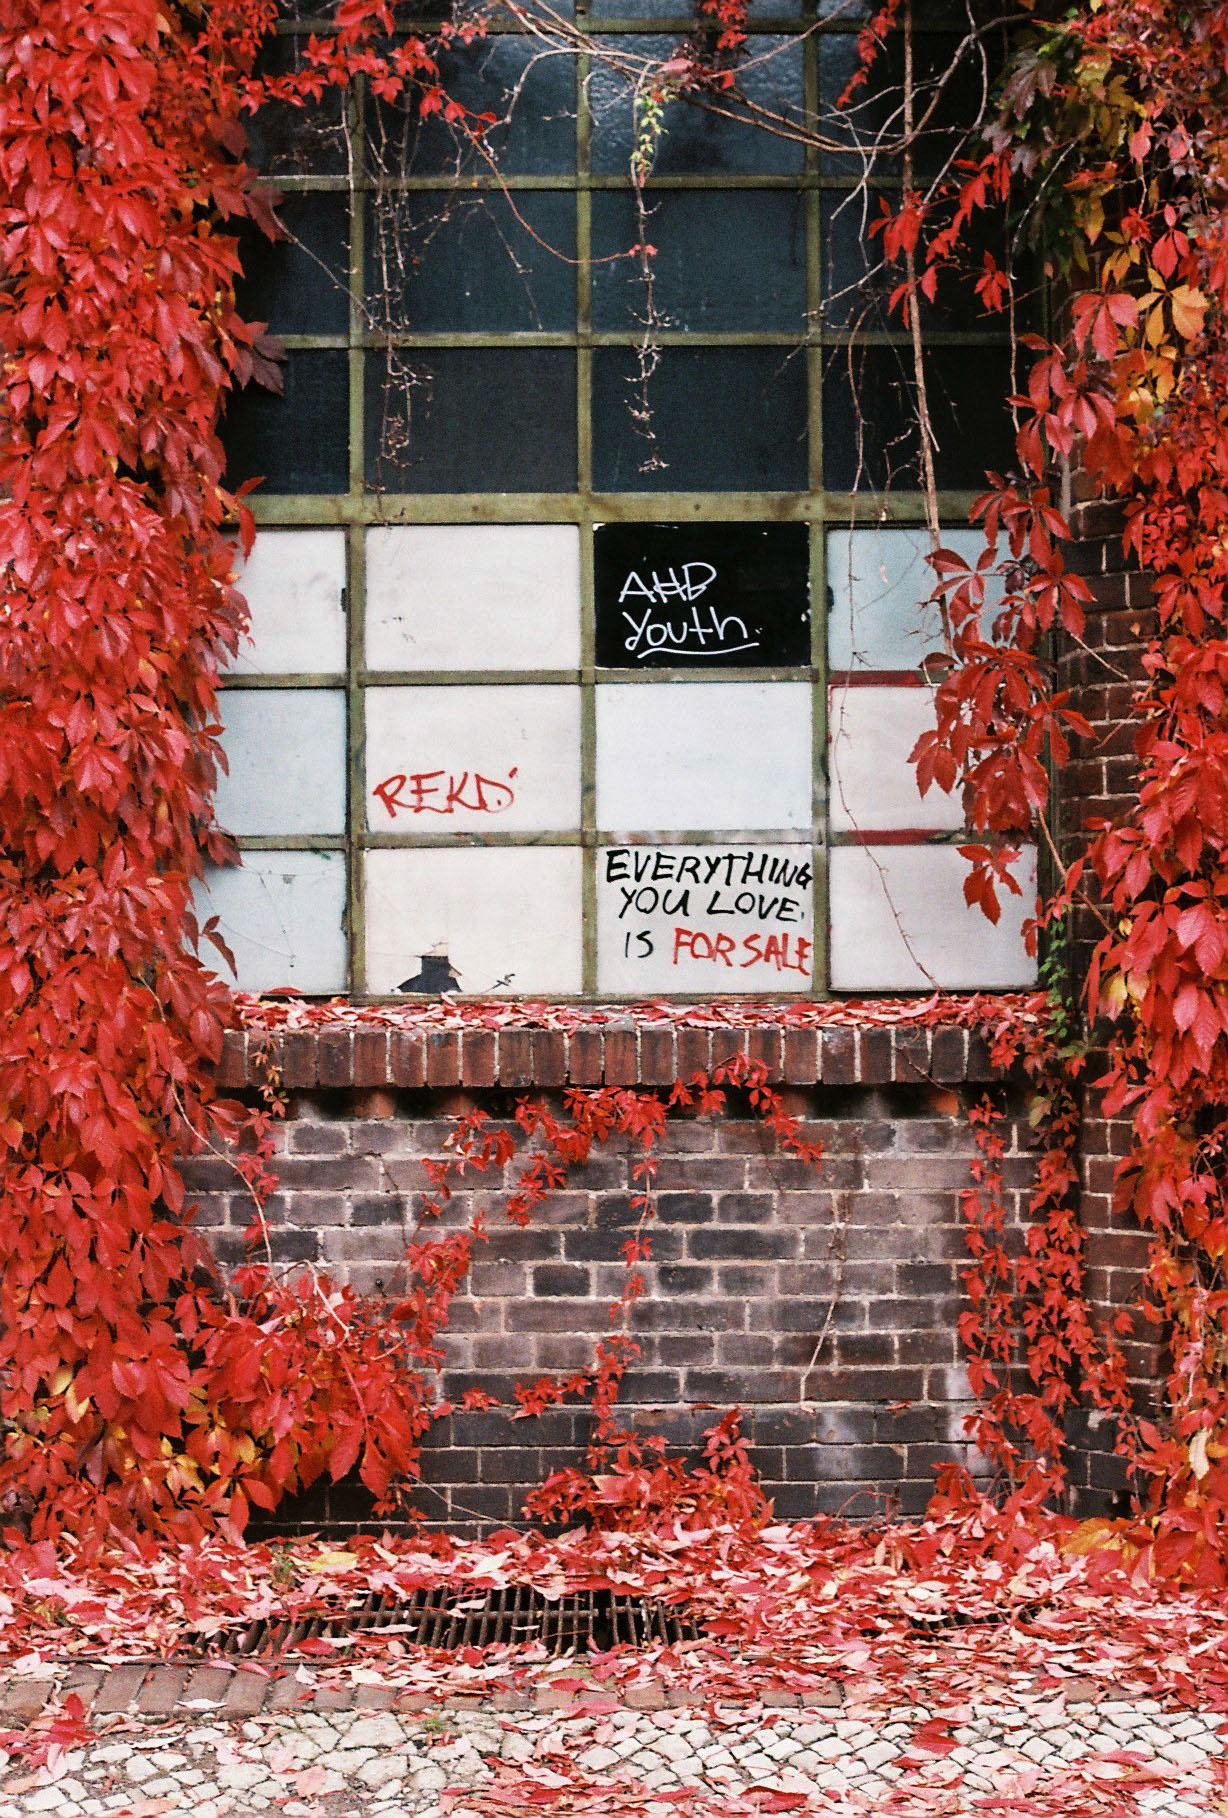 Red leaves surround a warehouse window